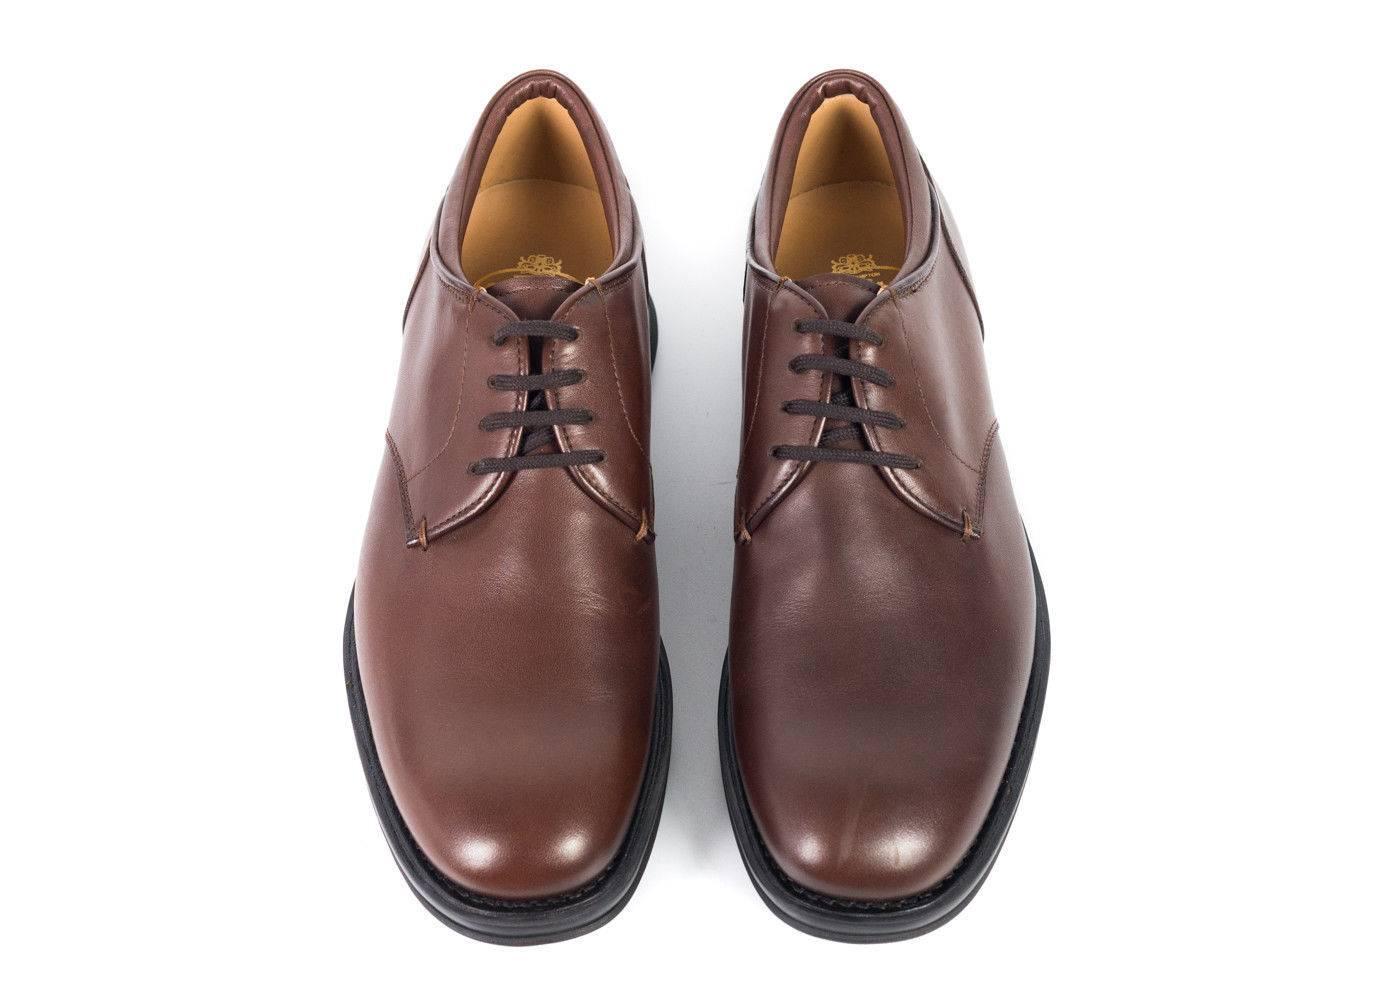 Brand New Church's Women's Lace Up ShoesOriginal Box & Dust Bag IncludedRetails in Store & Online for $650Size IT37 / US7 Fits True to Size
Church's lace up shoes in a gorgeous brown leather. These lace up shoes are perfect for professional